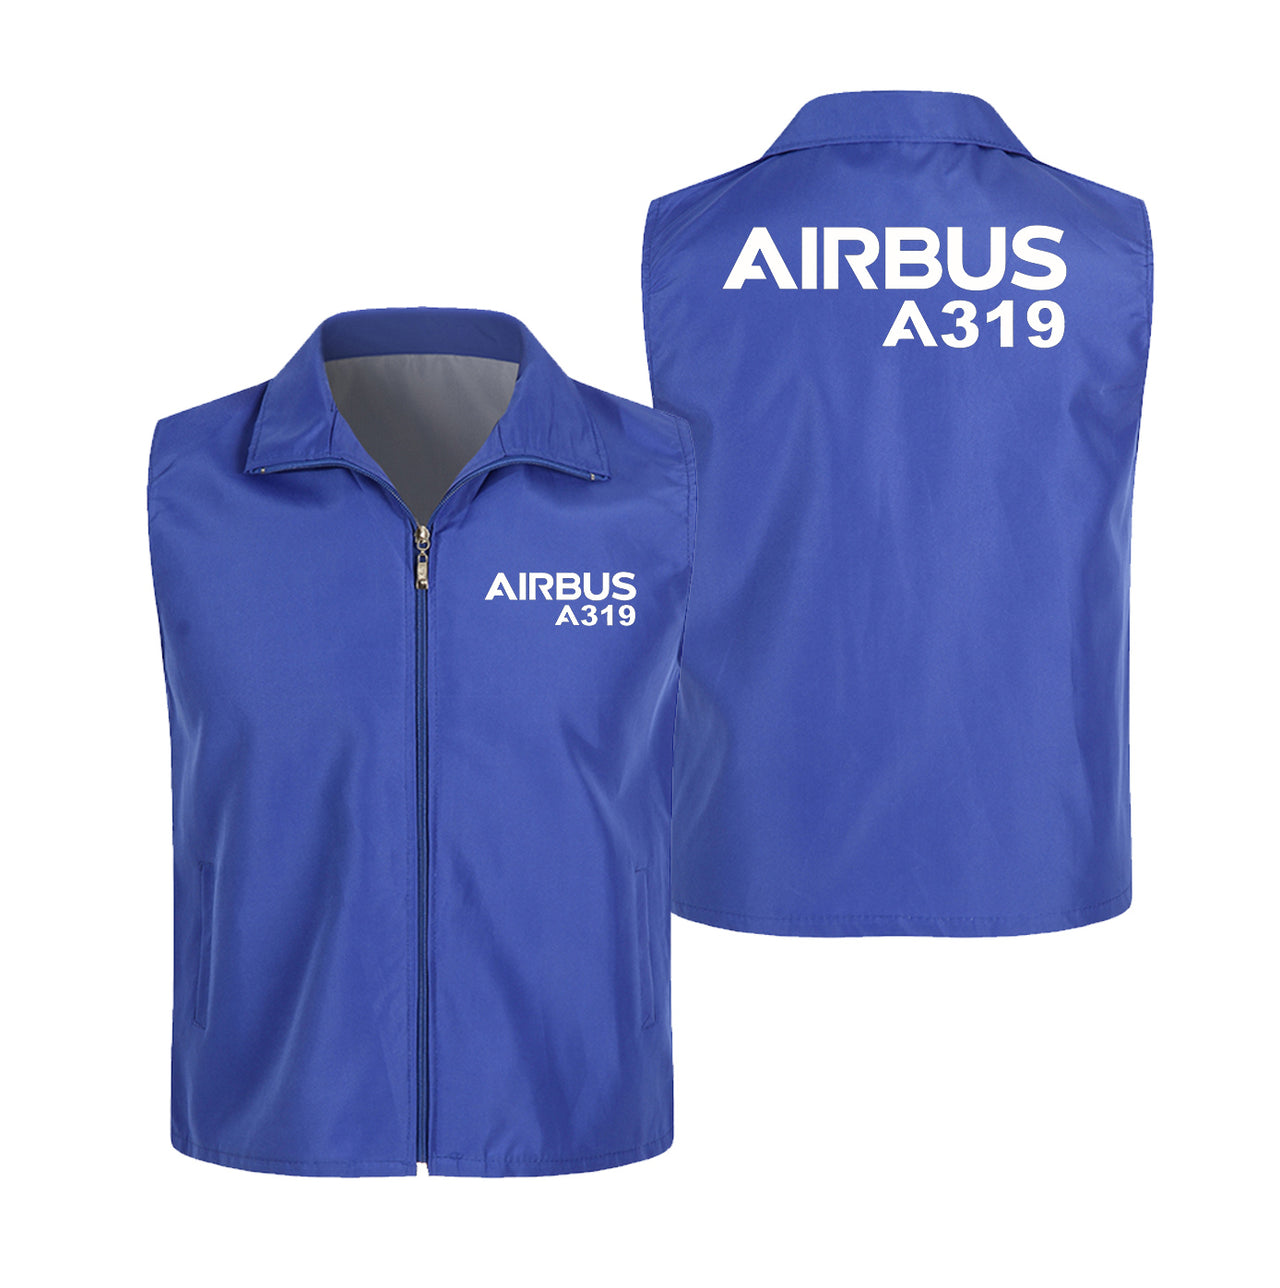 Airbus A319 & Text Designed Thin Style Vests